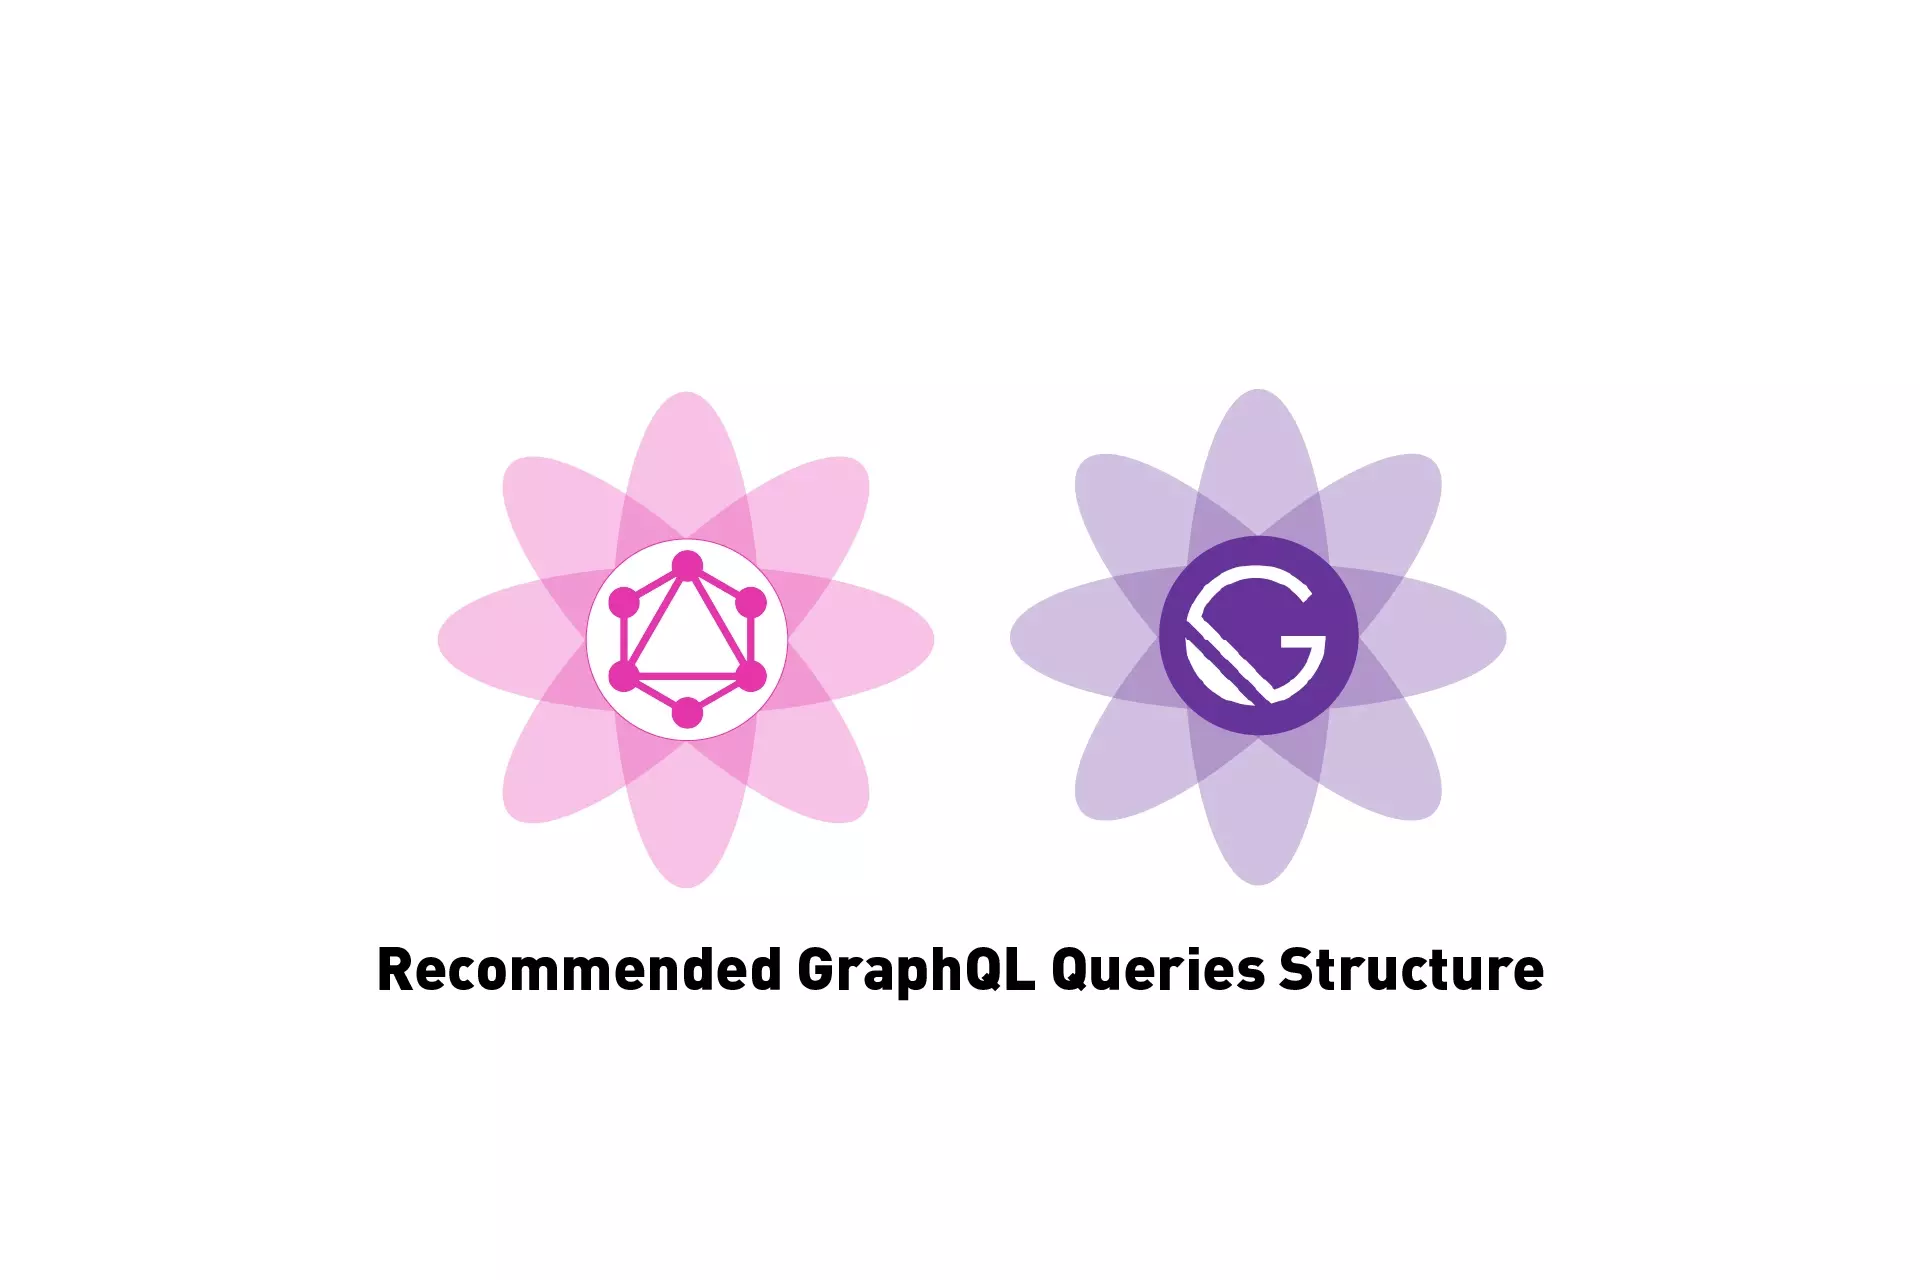 Two flowers that represent GraphQL and Gatsby side by side. Beneath them sits the text "Recommended GraphQL Queries Structure".